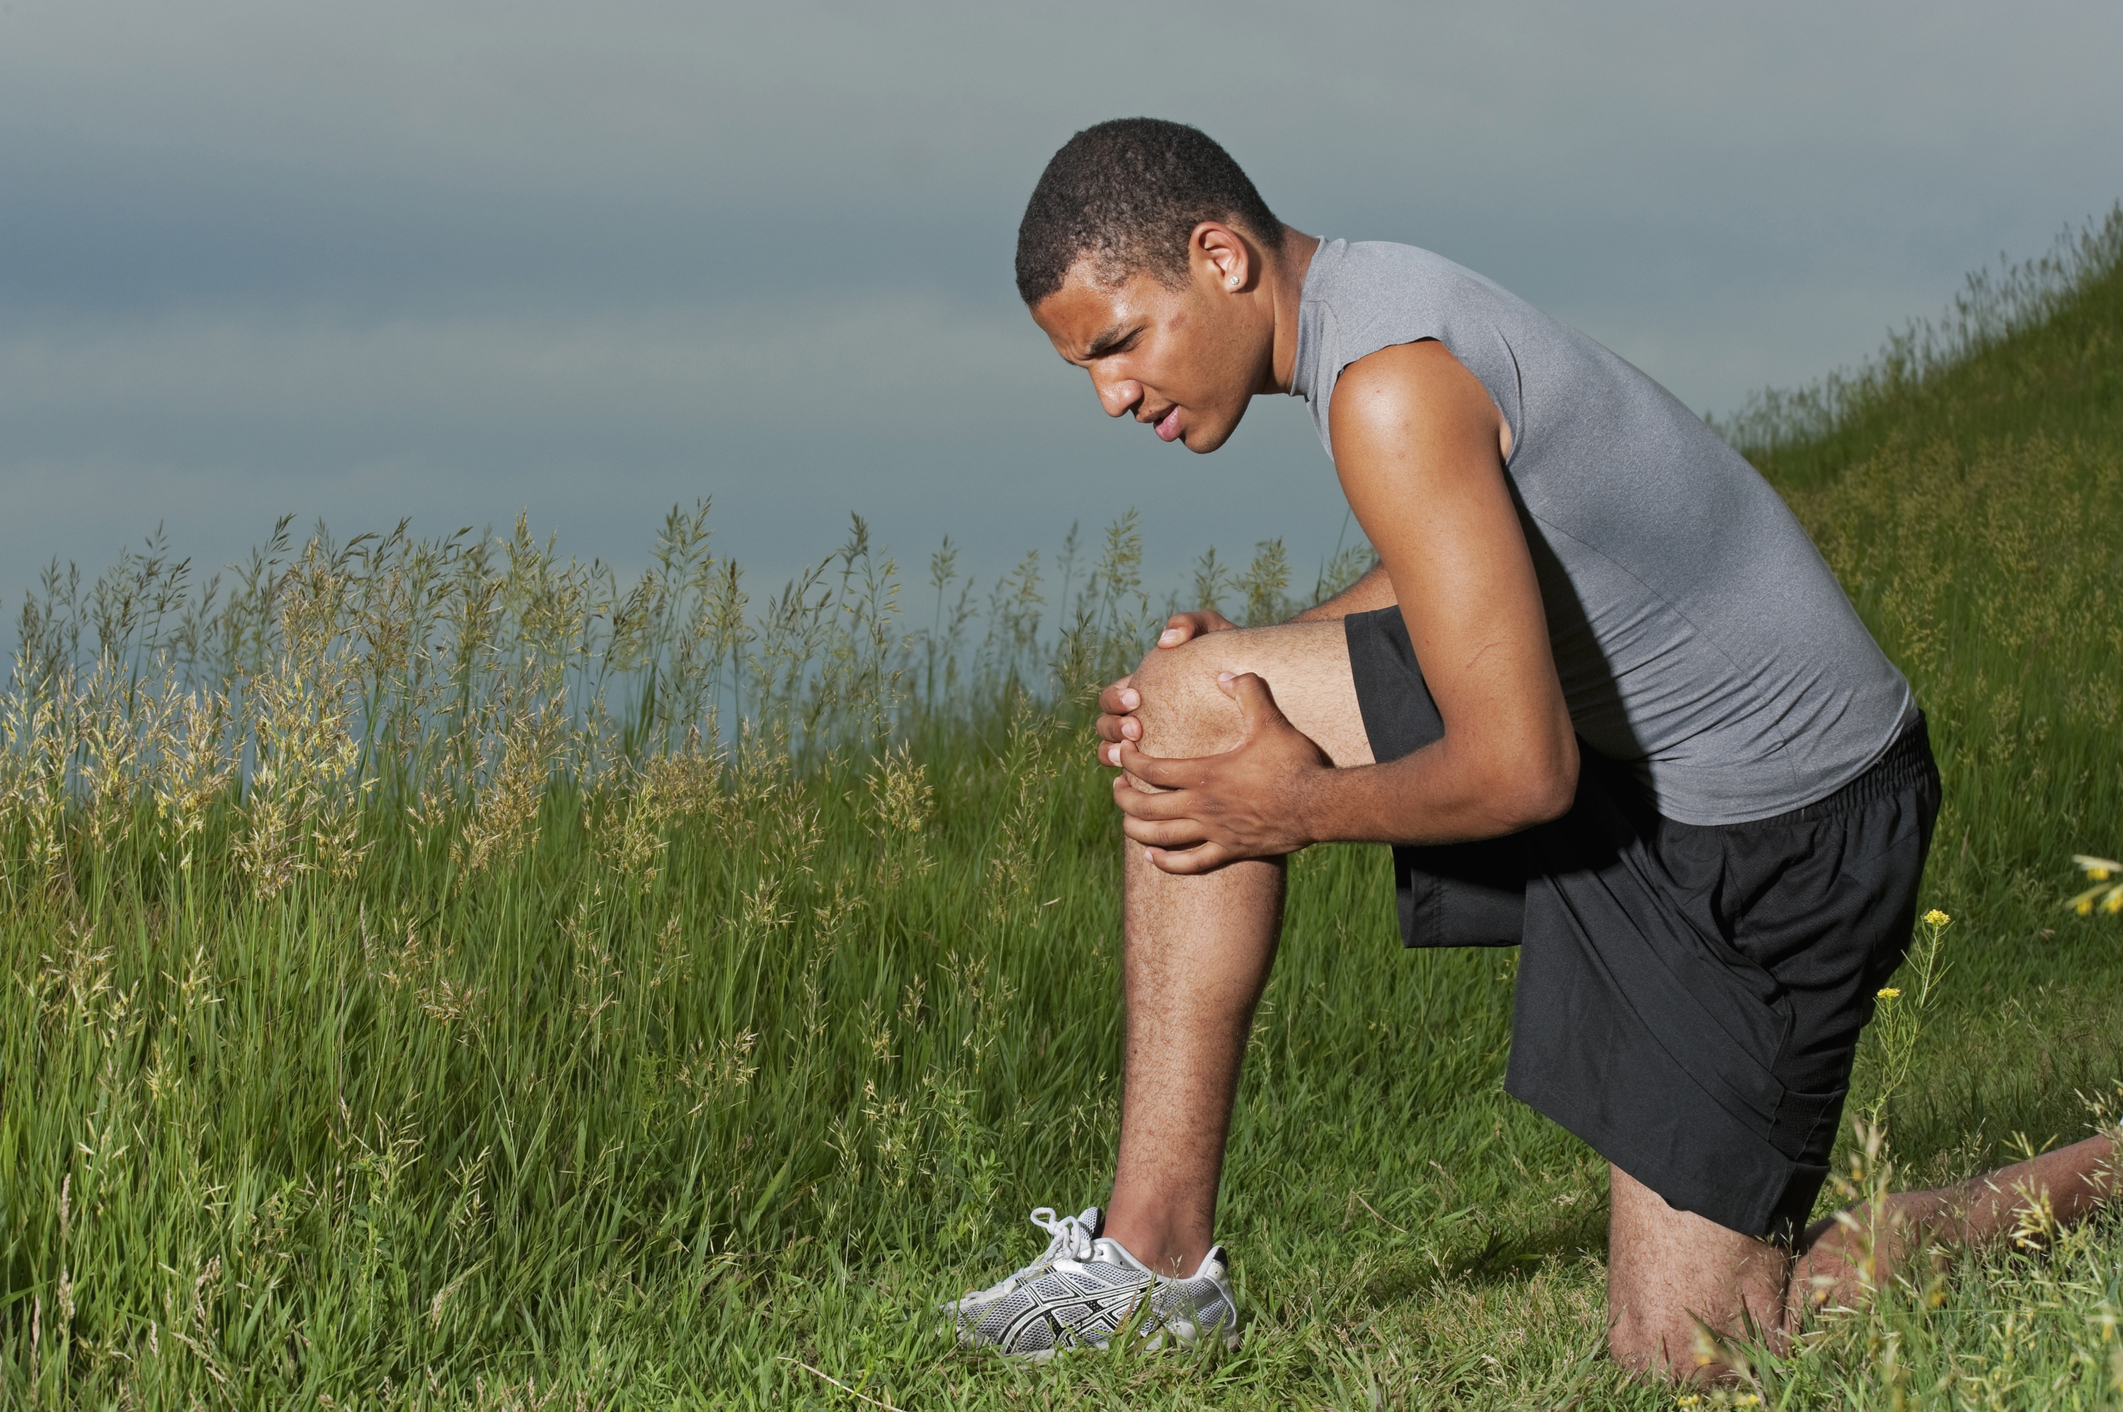 A runner kneeling and grabbing one knee in the middle of a field